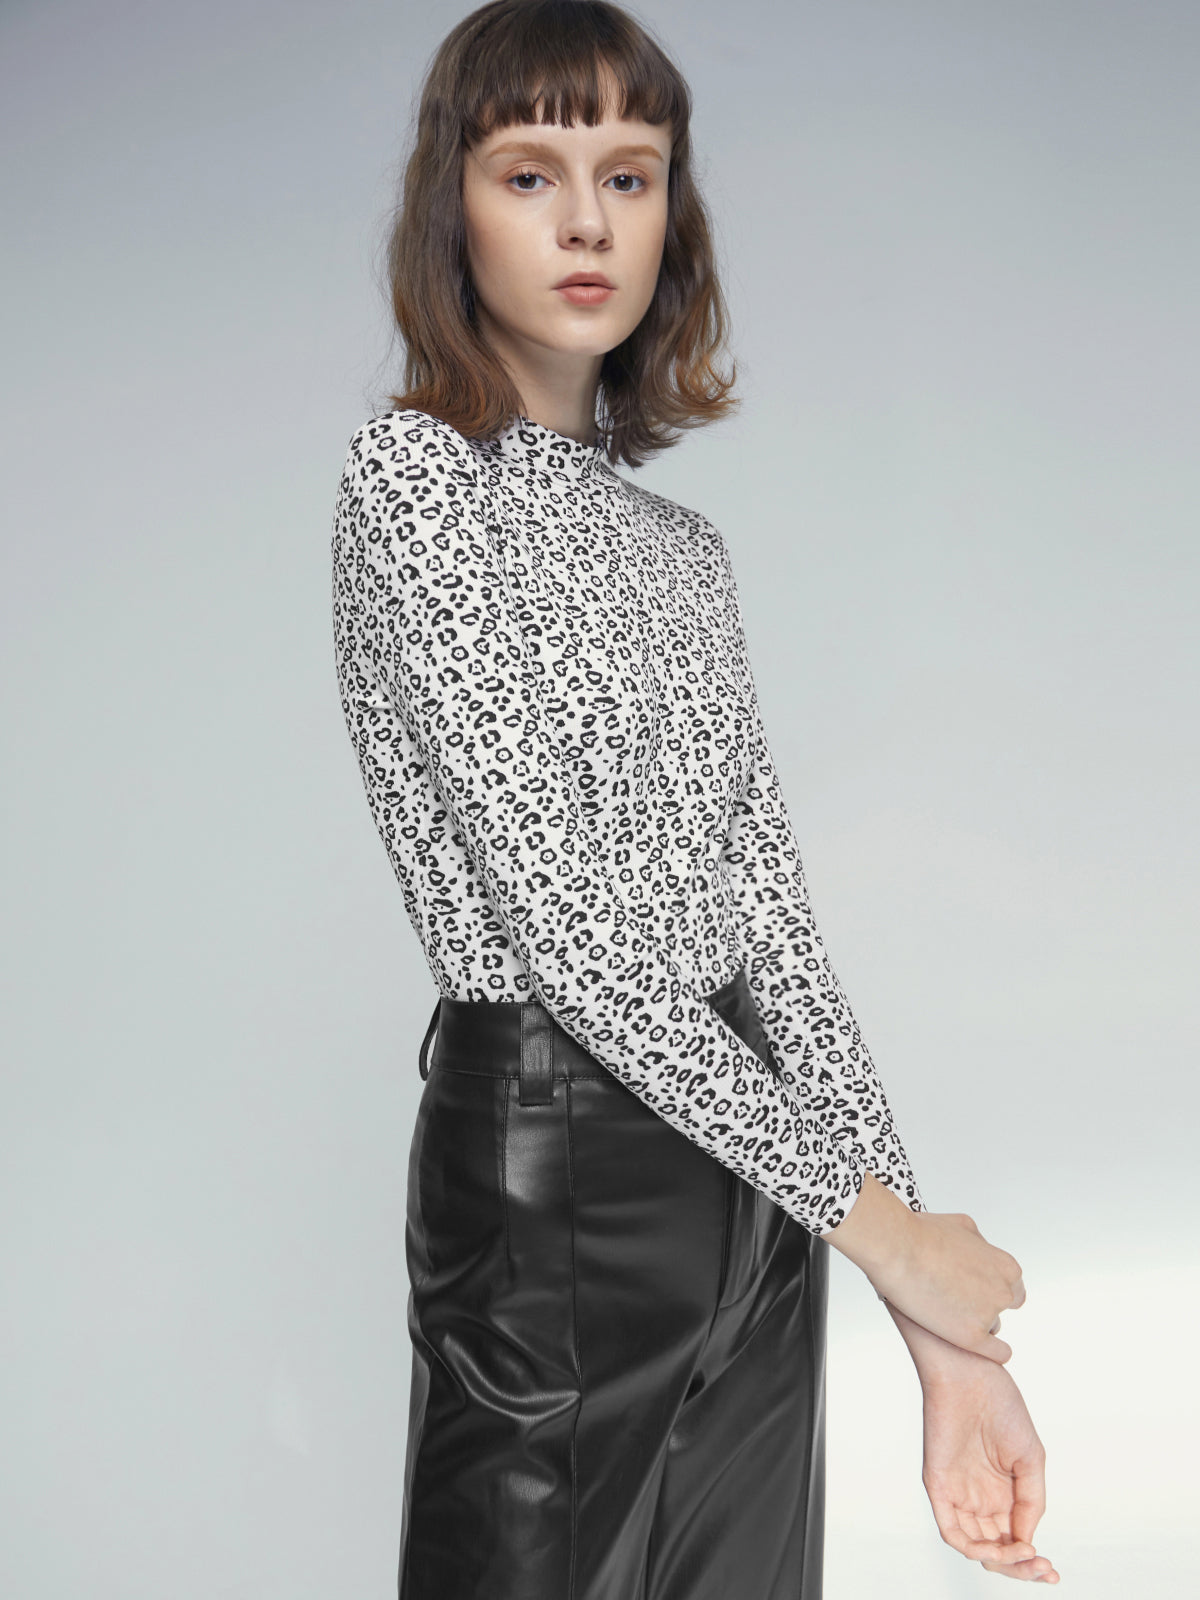 Black and White Spotted Mockneck Long Sleeve Top